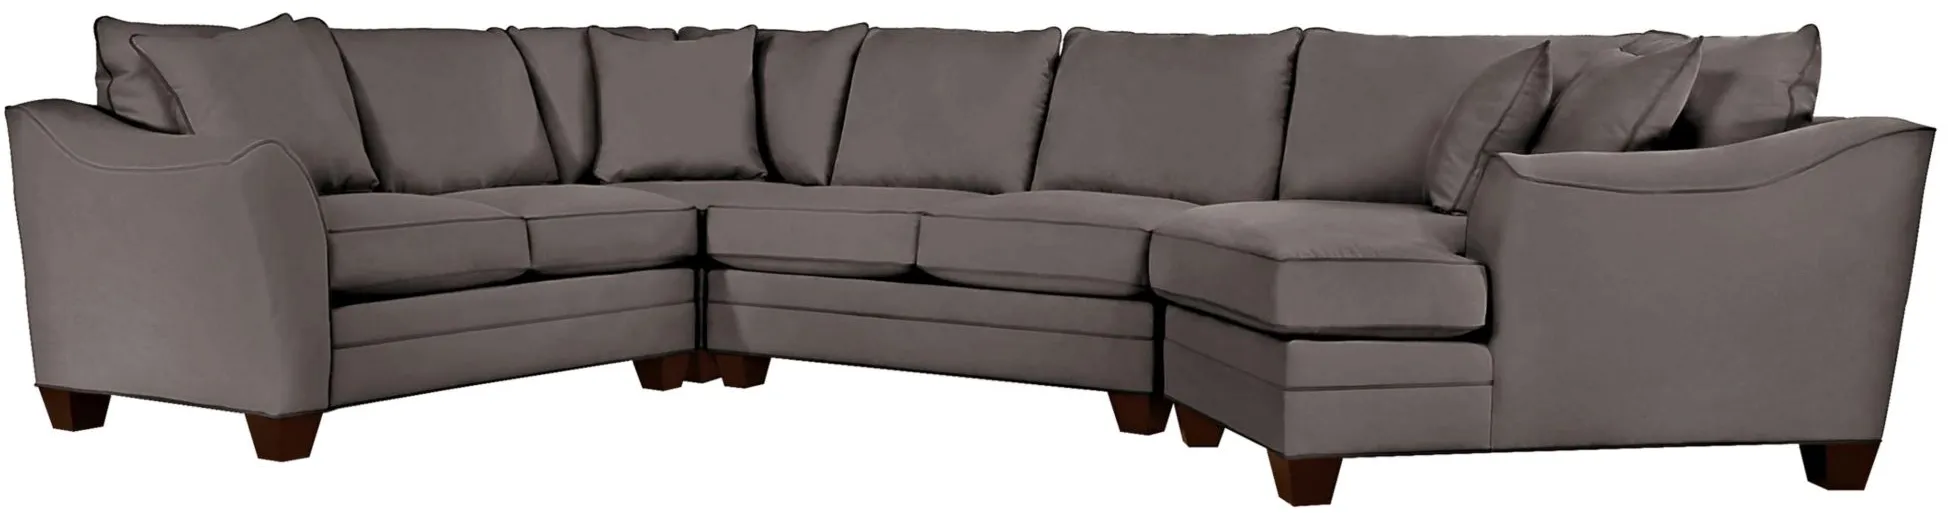 Foresthill 4-pc. Right Hand Cuddler with Loveseat Sectional Sofa in Suede So Soft Slate by H.M. Richards